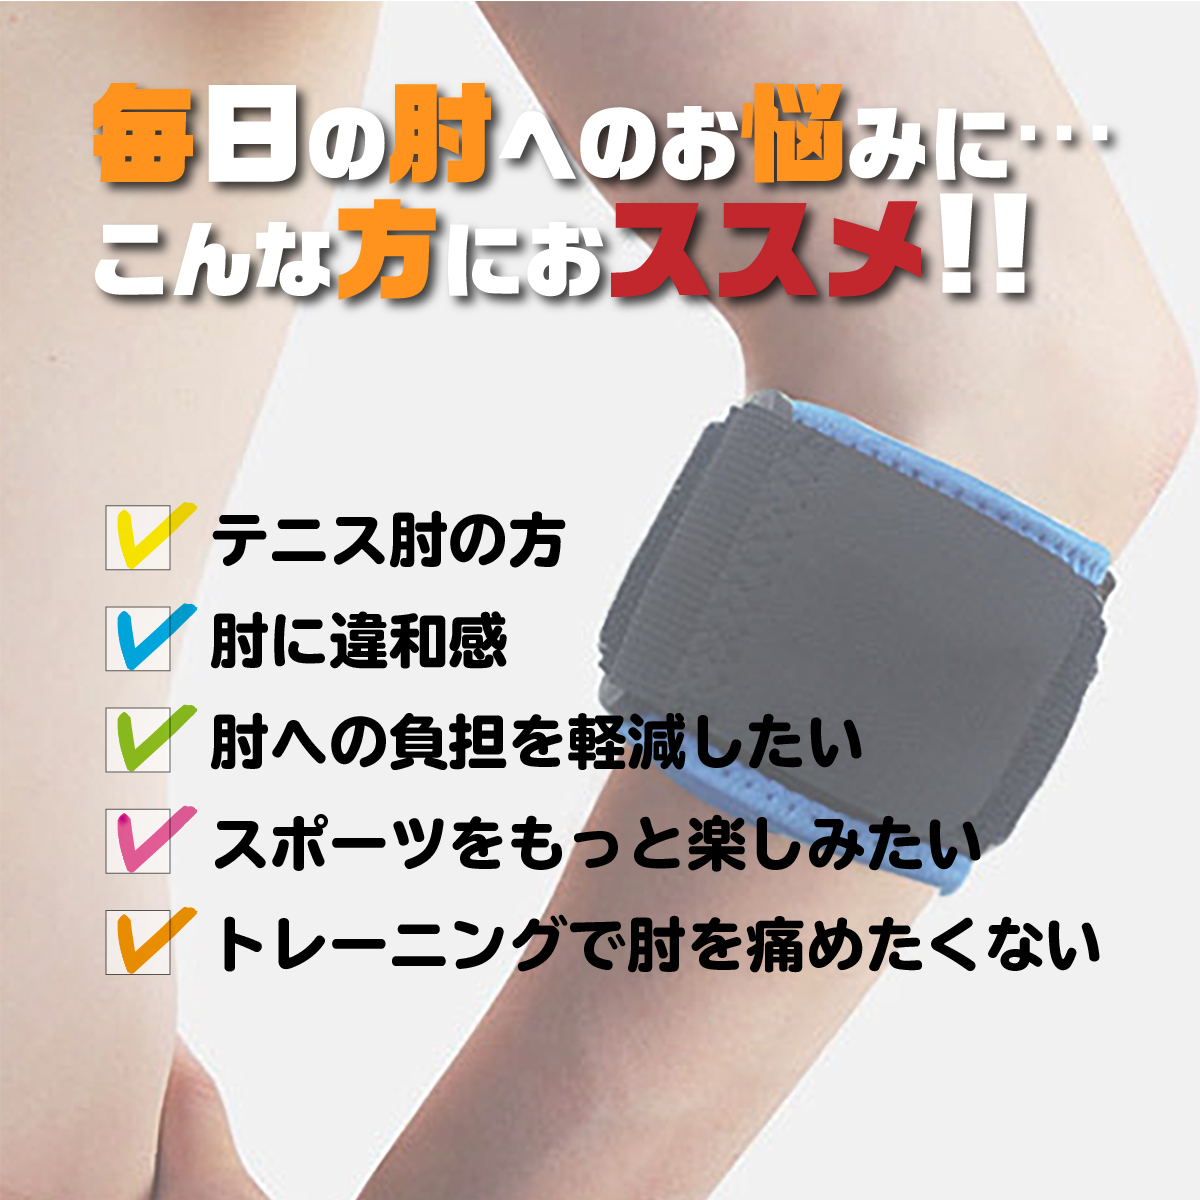  elbow supporter tennis elbow .tore Golf bare- elbow band belt left right combined use sport pain reduction training practice 